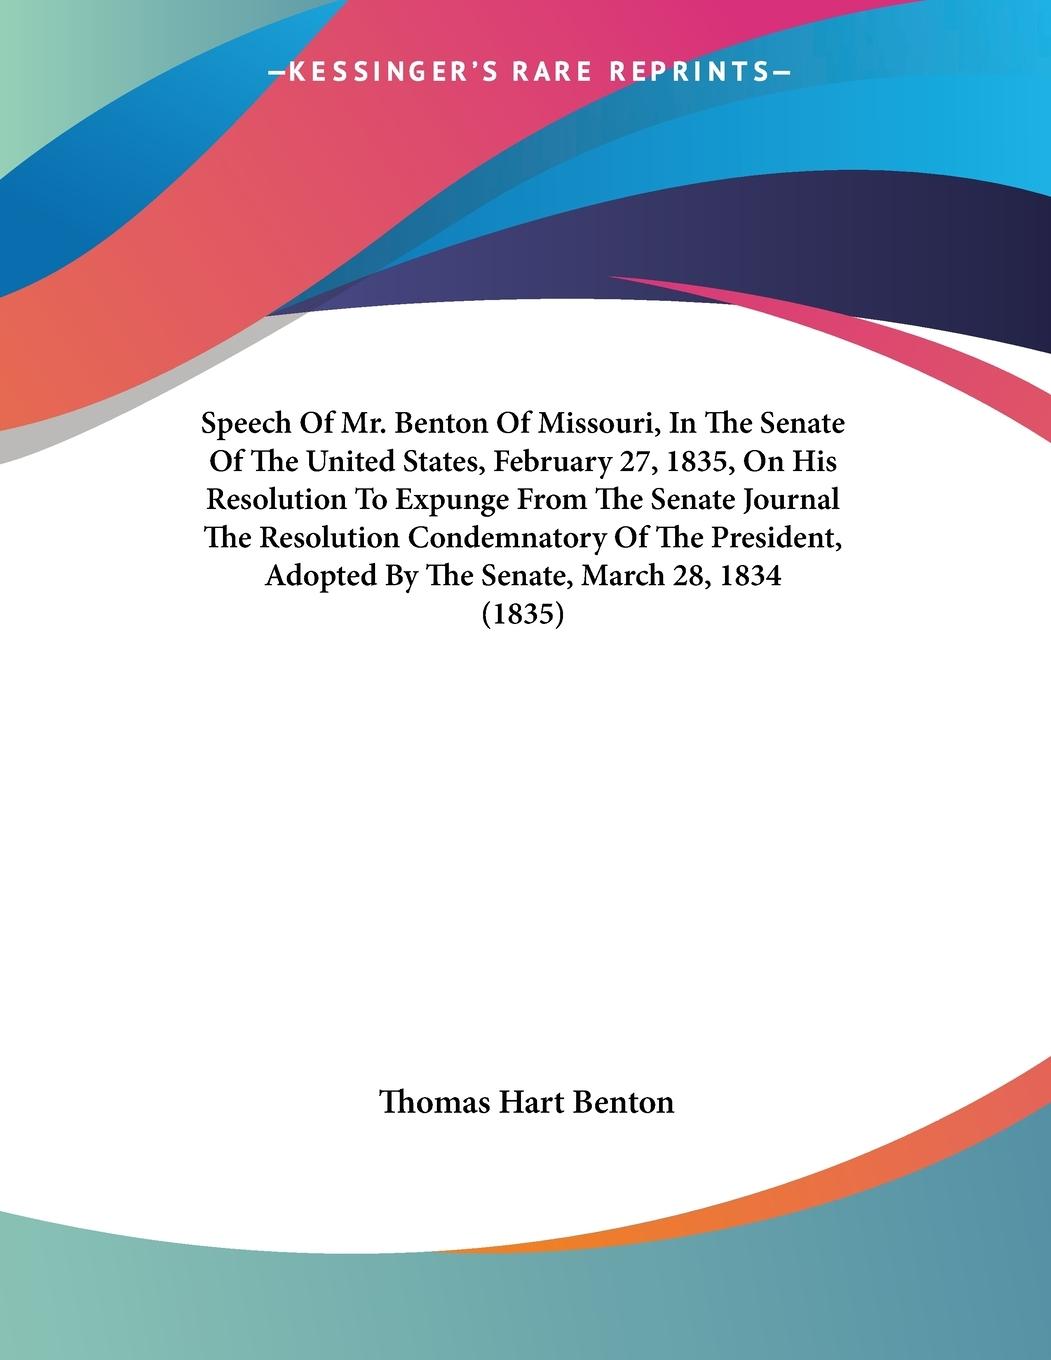 Speech Of Mr. Benton Of Missouri, In The Senate Of The United States, February 27, 1835, On His Resolution To Expunge From The Senate Journal The Resolution Condemnatory Of The President, Adopted By The Senate, March 28, 1834 (1835) - Benton, Thomas Hart